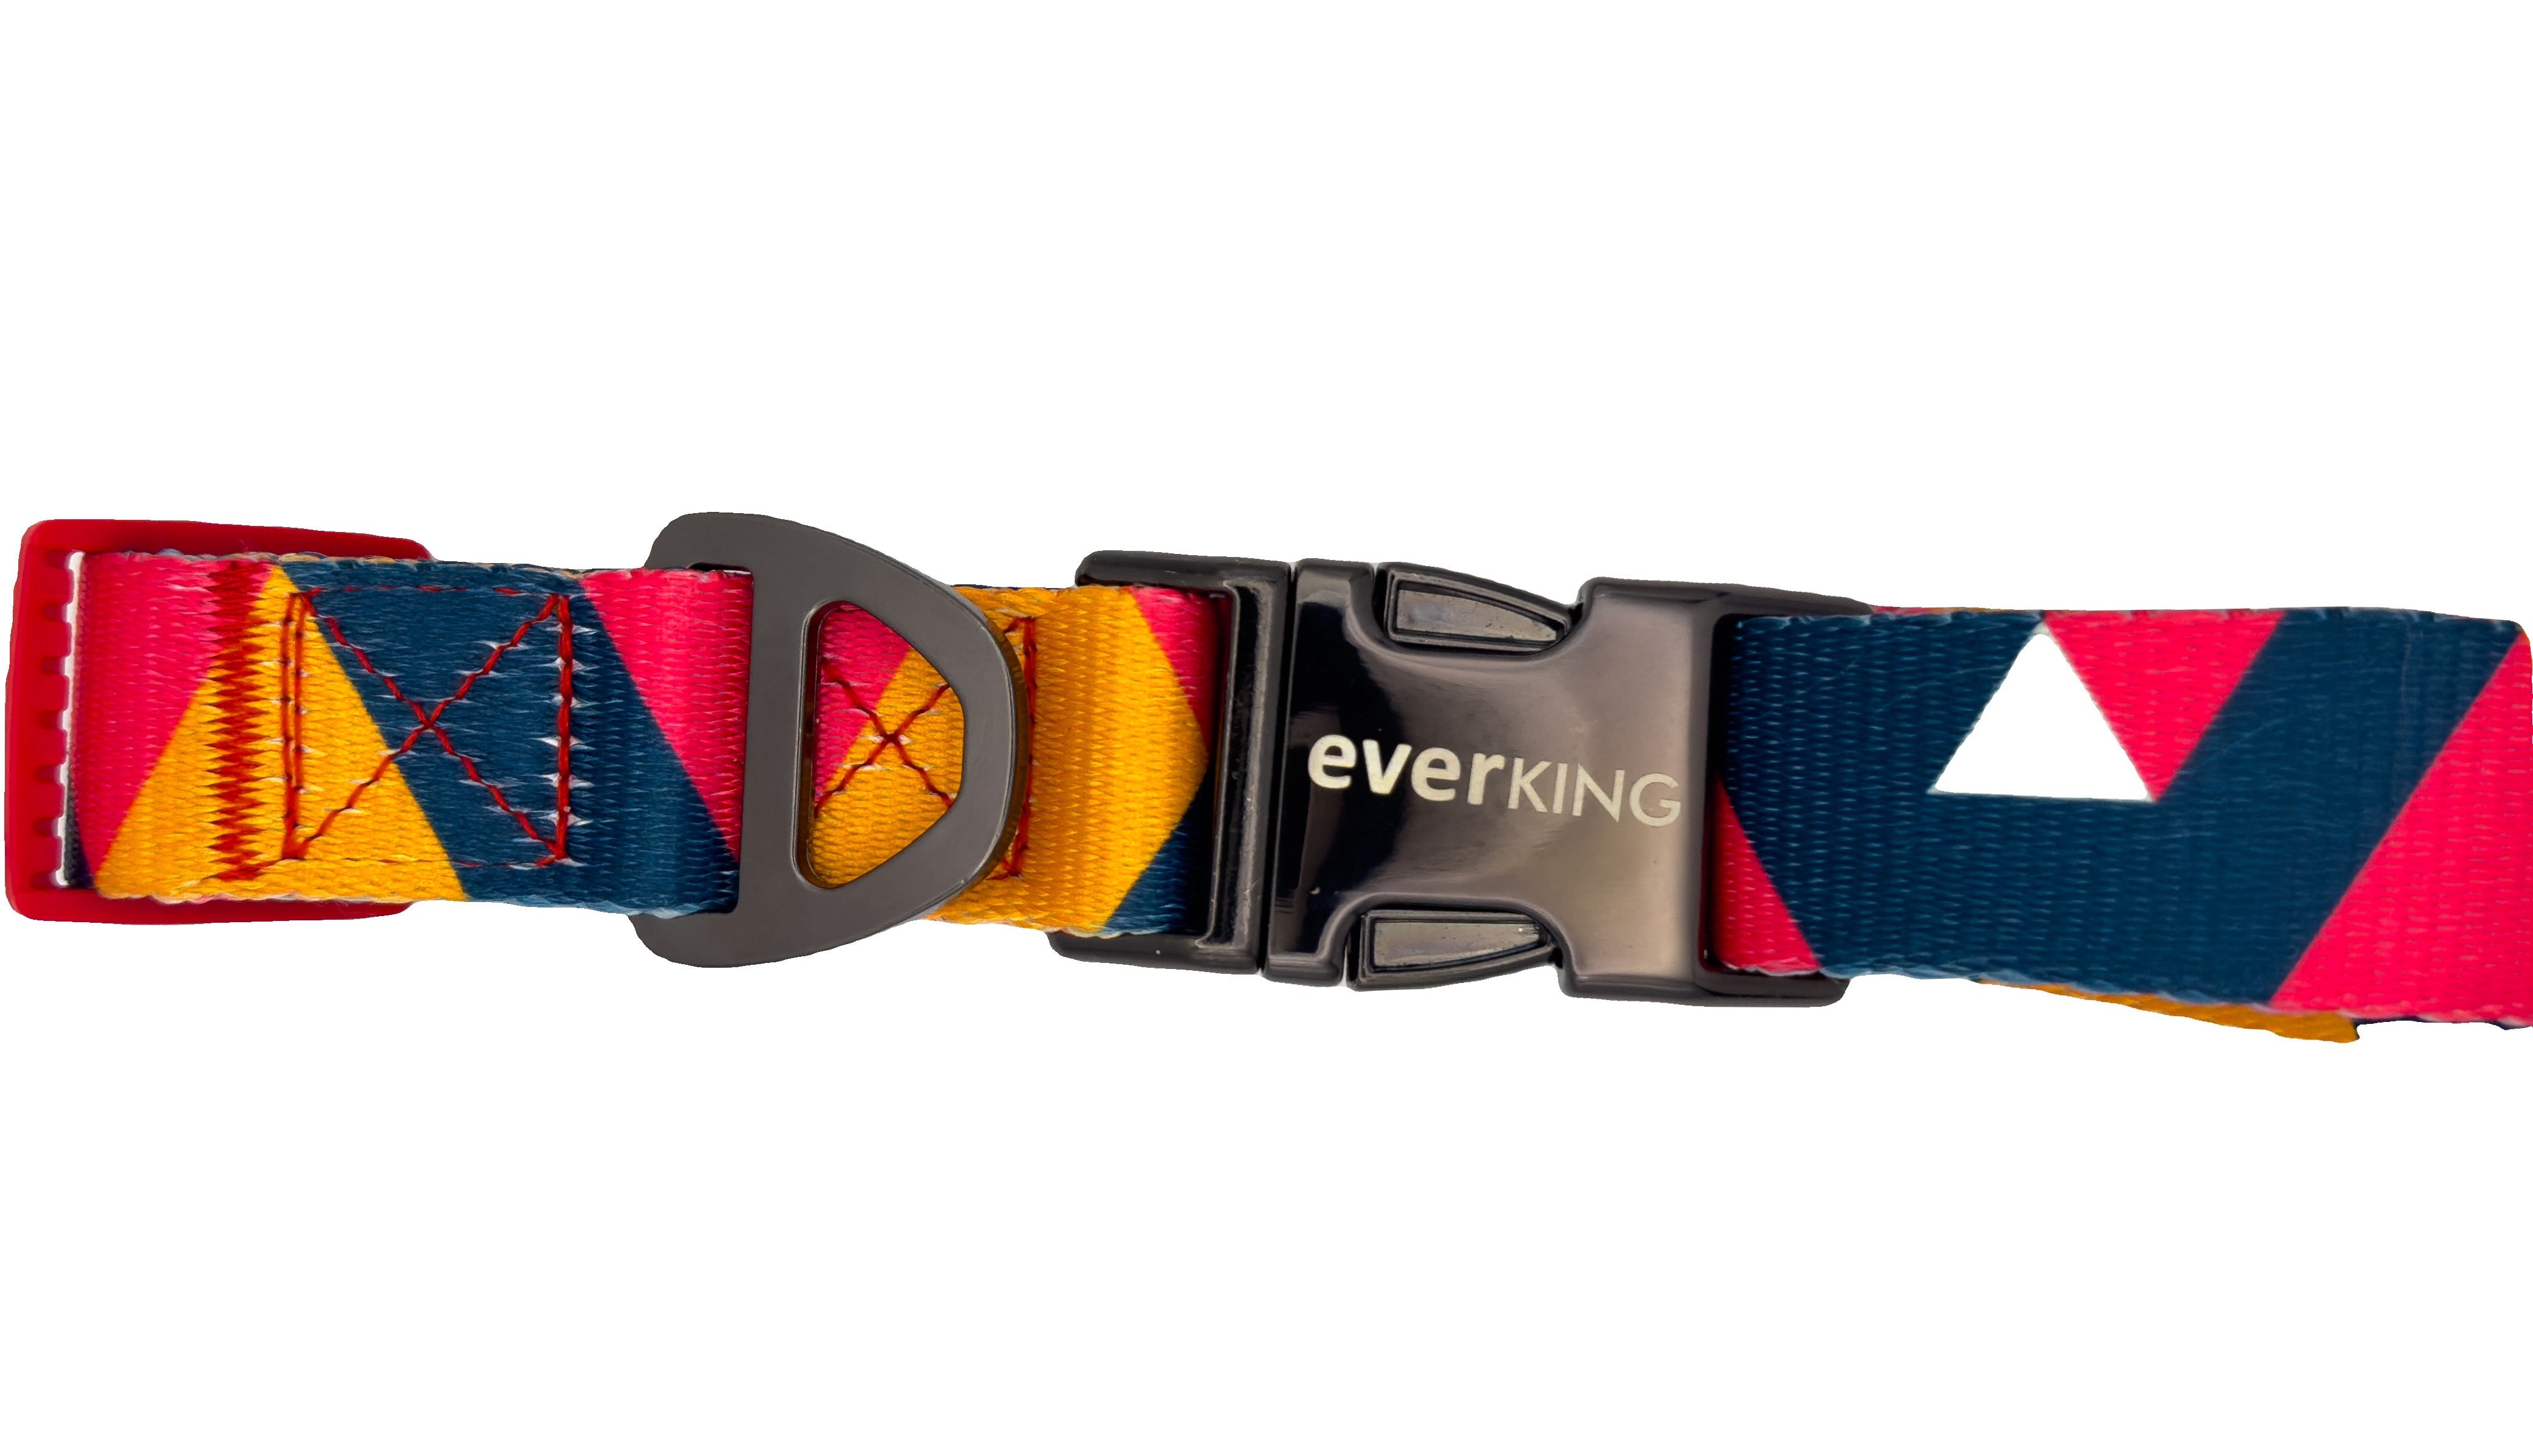 EVERKING Dog Collar Geometric Design 3 Sizes Pet Collar Soft and Comfy Adjustable Collar for Dogs - (Vanilla, L)